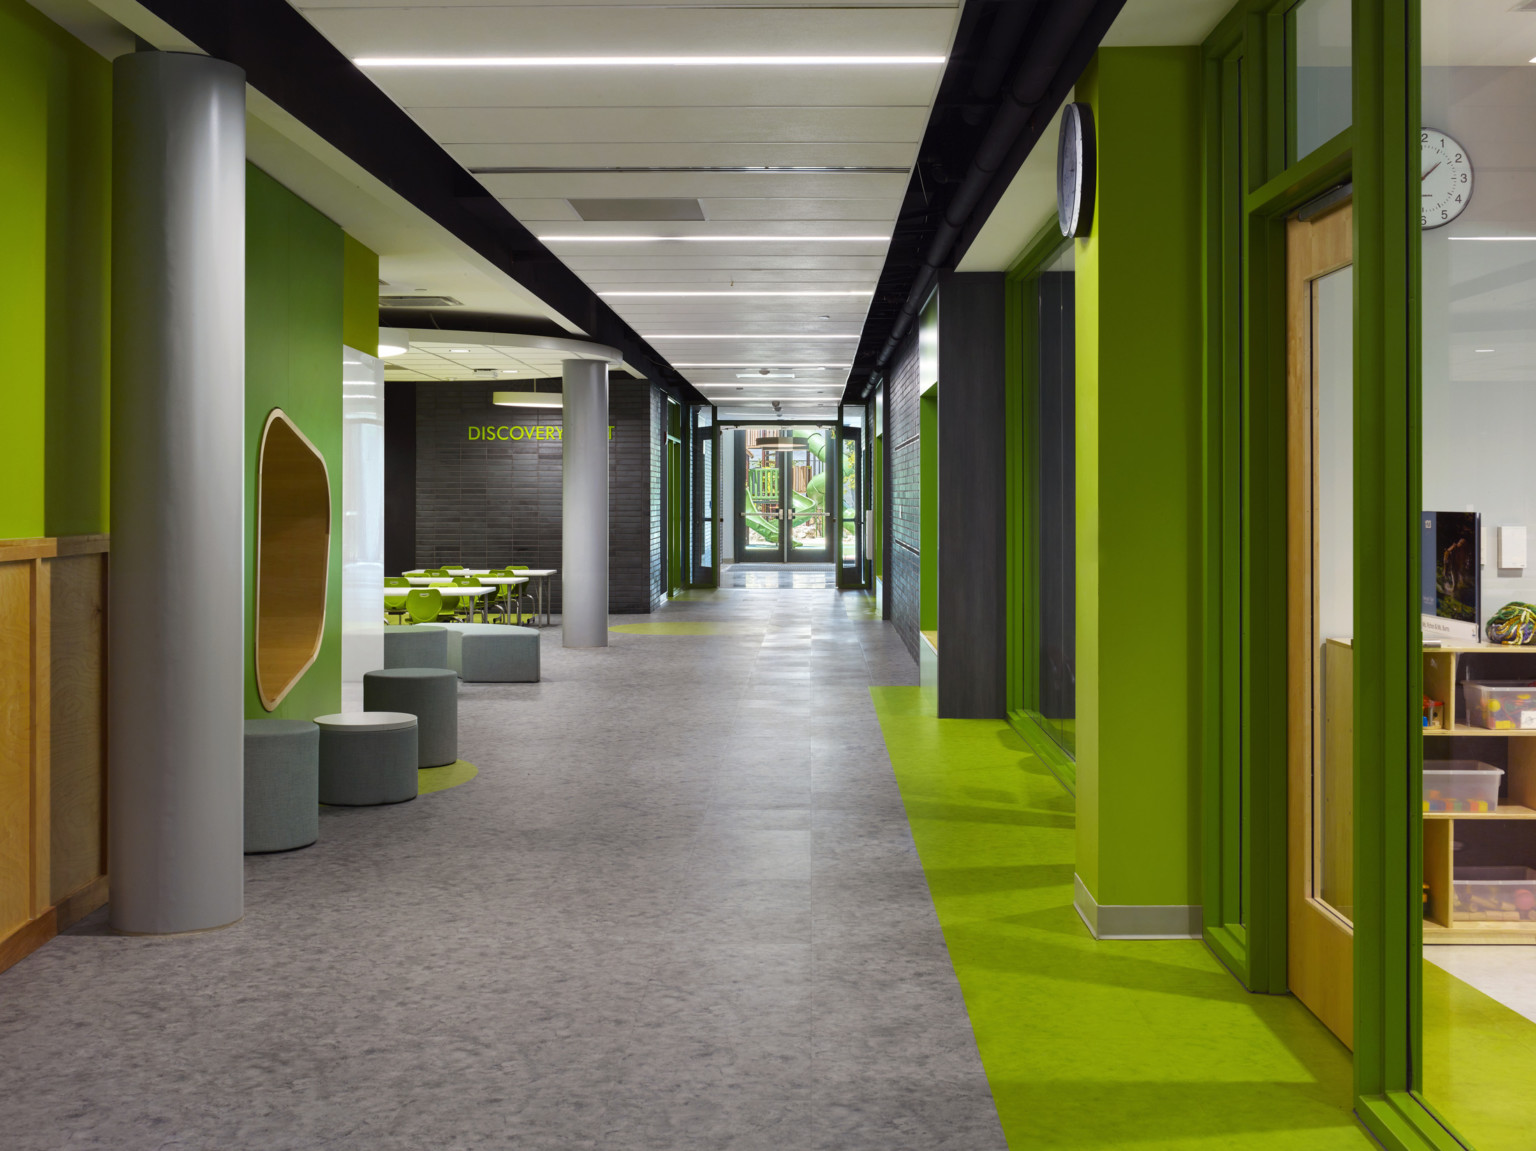 Green hallway with wood accents and transparent classroom walls. Grey stools around organic wood panel wall cutout to left